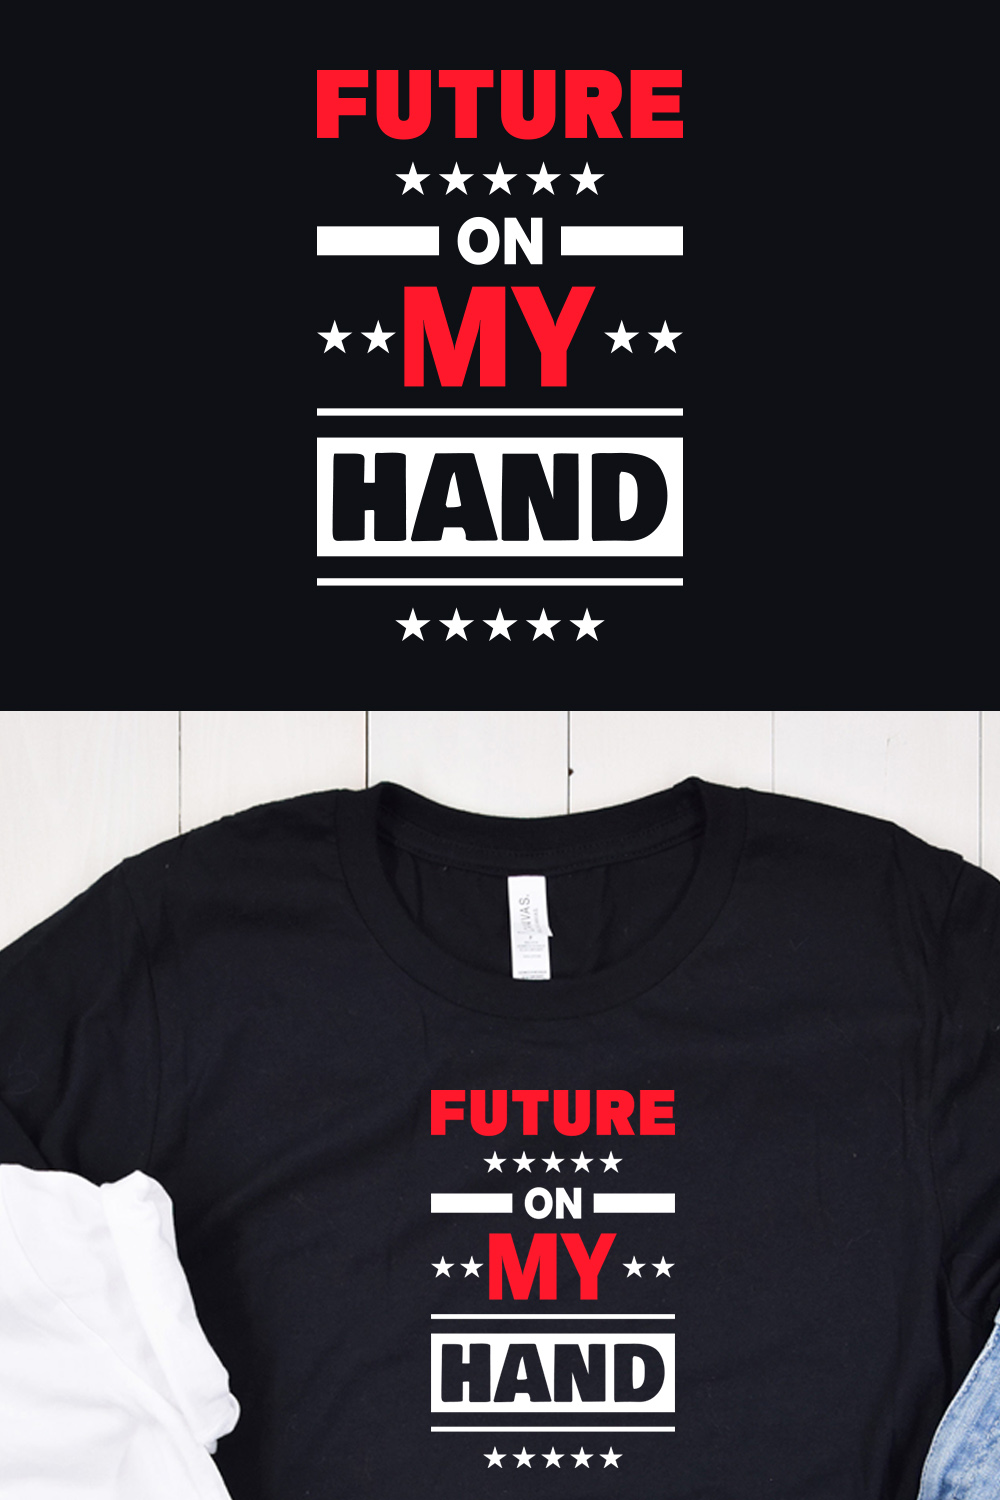 Image of a black t-shirt with a beautiful inscription "future on my hand" in red and white colors.